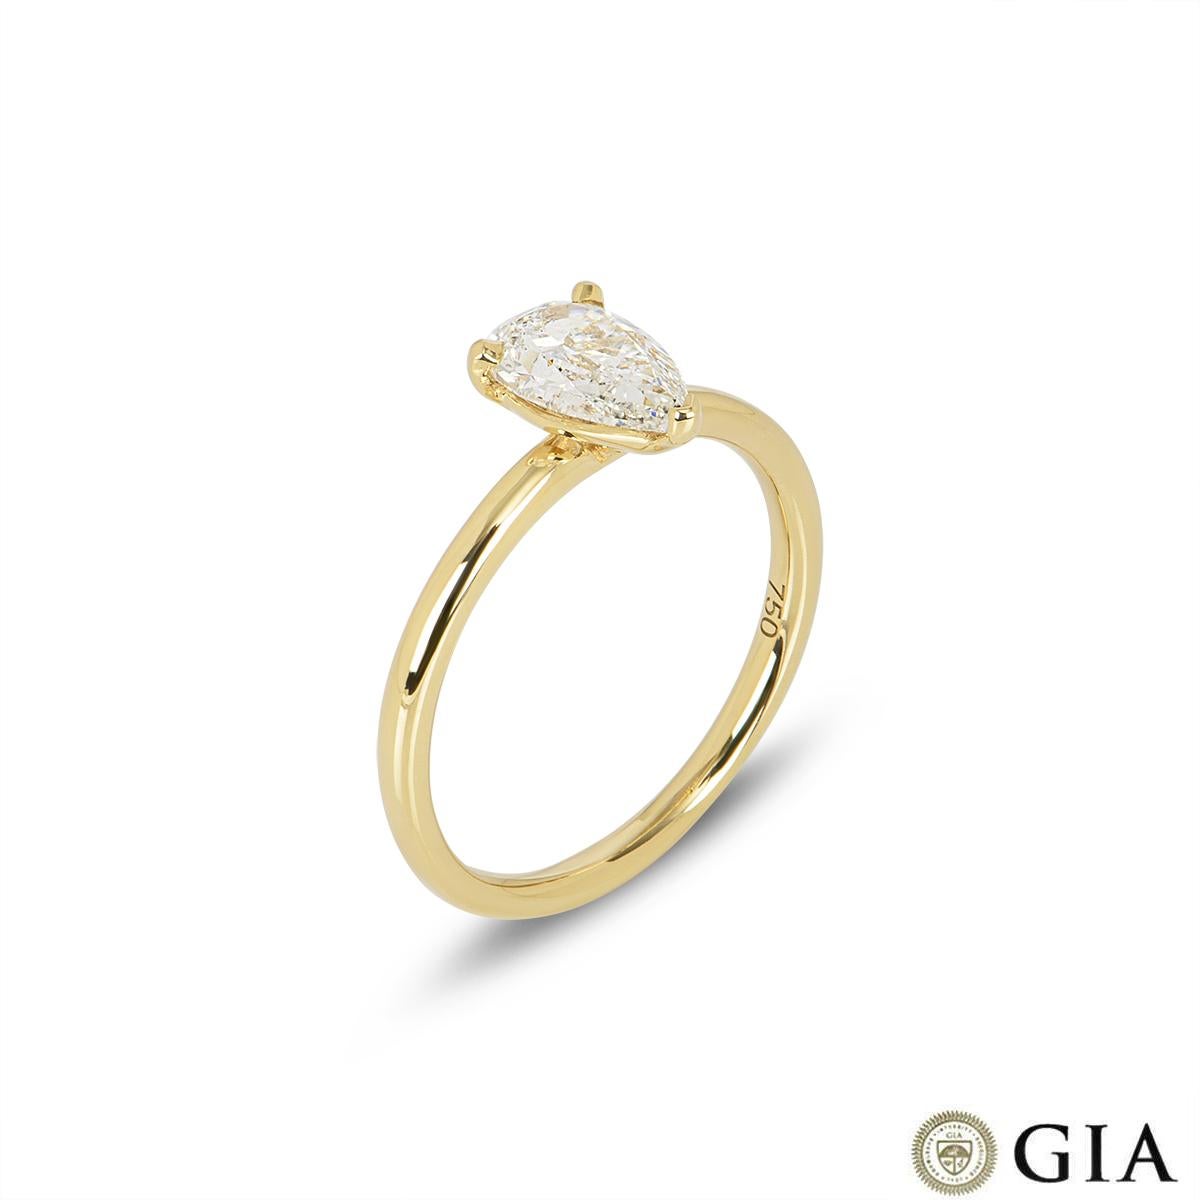 A stunning 18k yellow gold diamond engagement ring. The solitaire ring features a pear cut diamond set to the centre in a three claw mount weighing 1.00ct, G colour and SI1 clarity. The ring measures 1.90mm wide, has a gross weight of 2.69 grams and